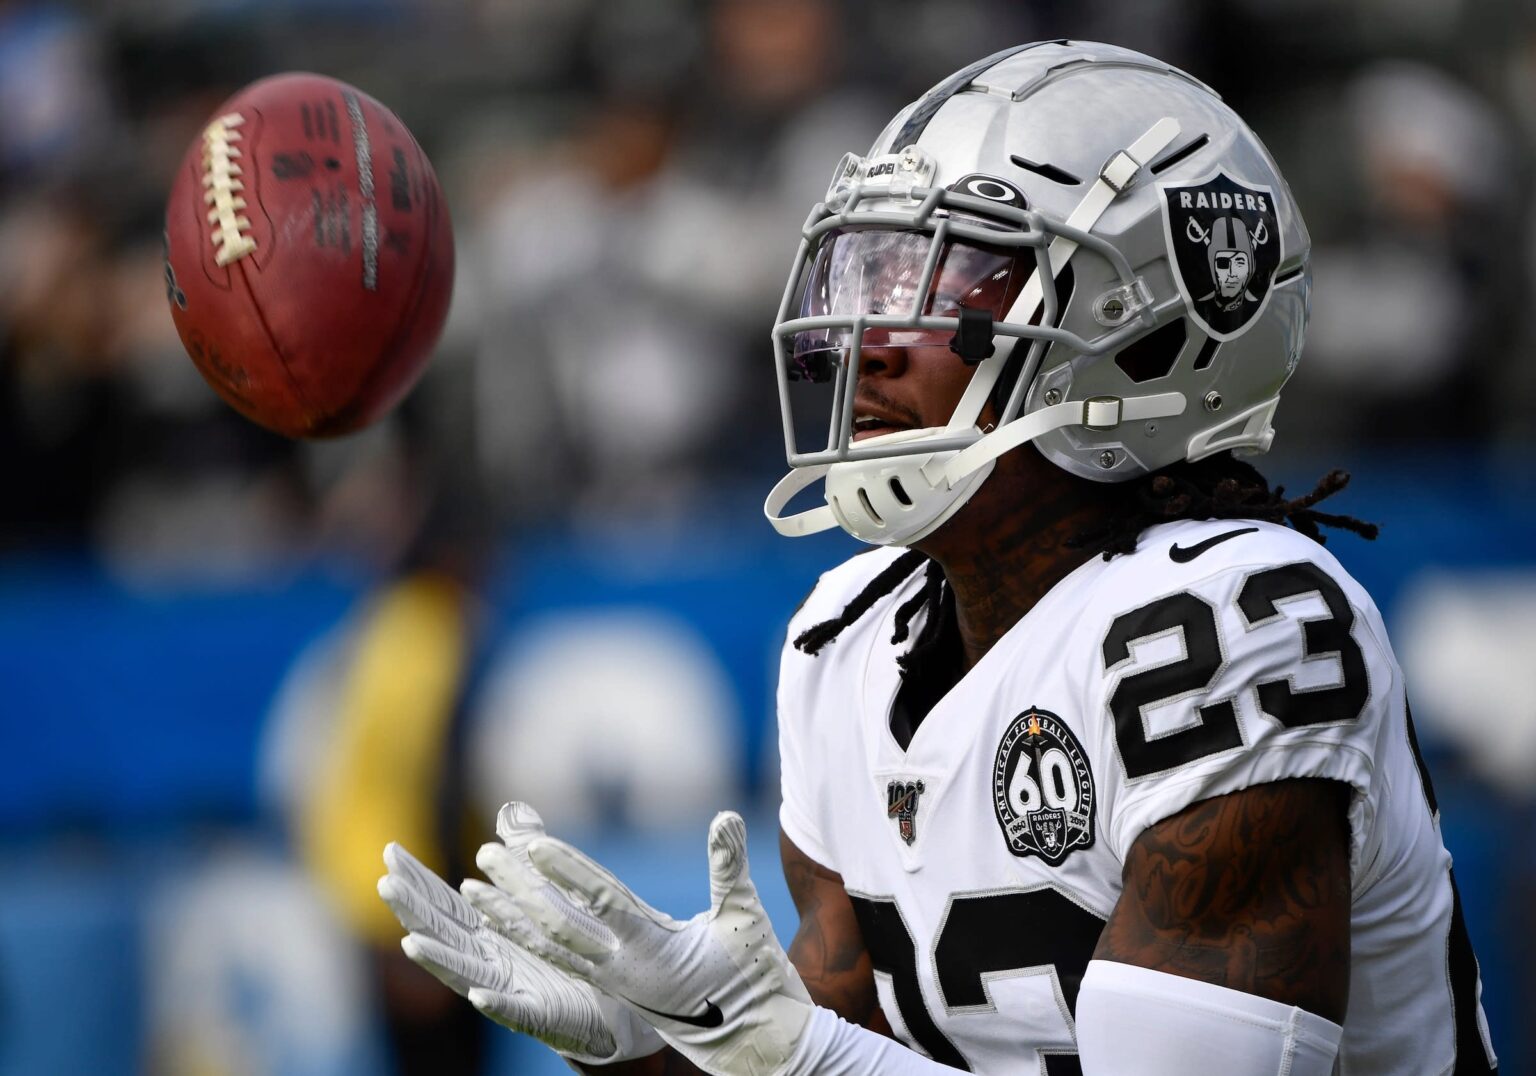 It’s not farfetched to agree that the Las Vegas Raiders ran a pretty decent offense in 2020, right? What could happen in 2021?